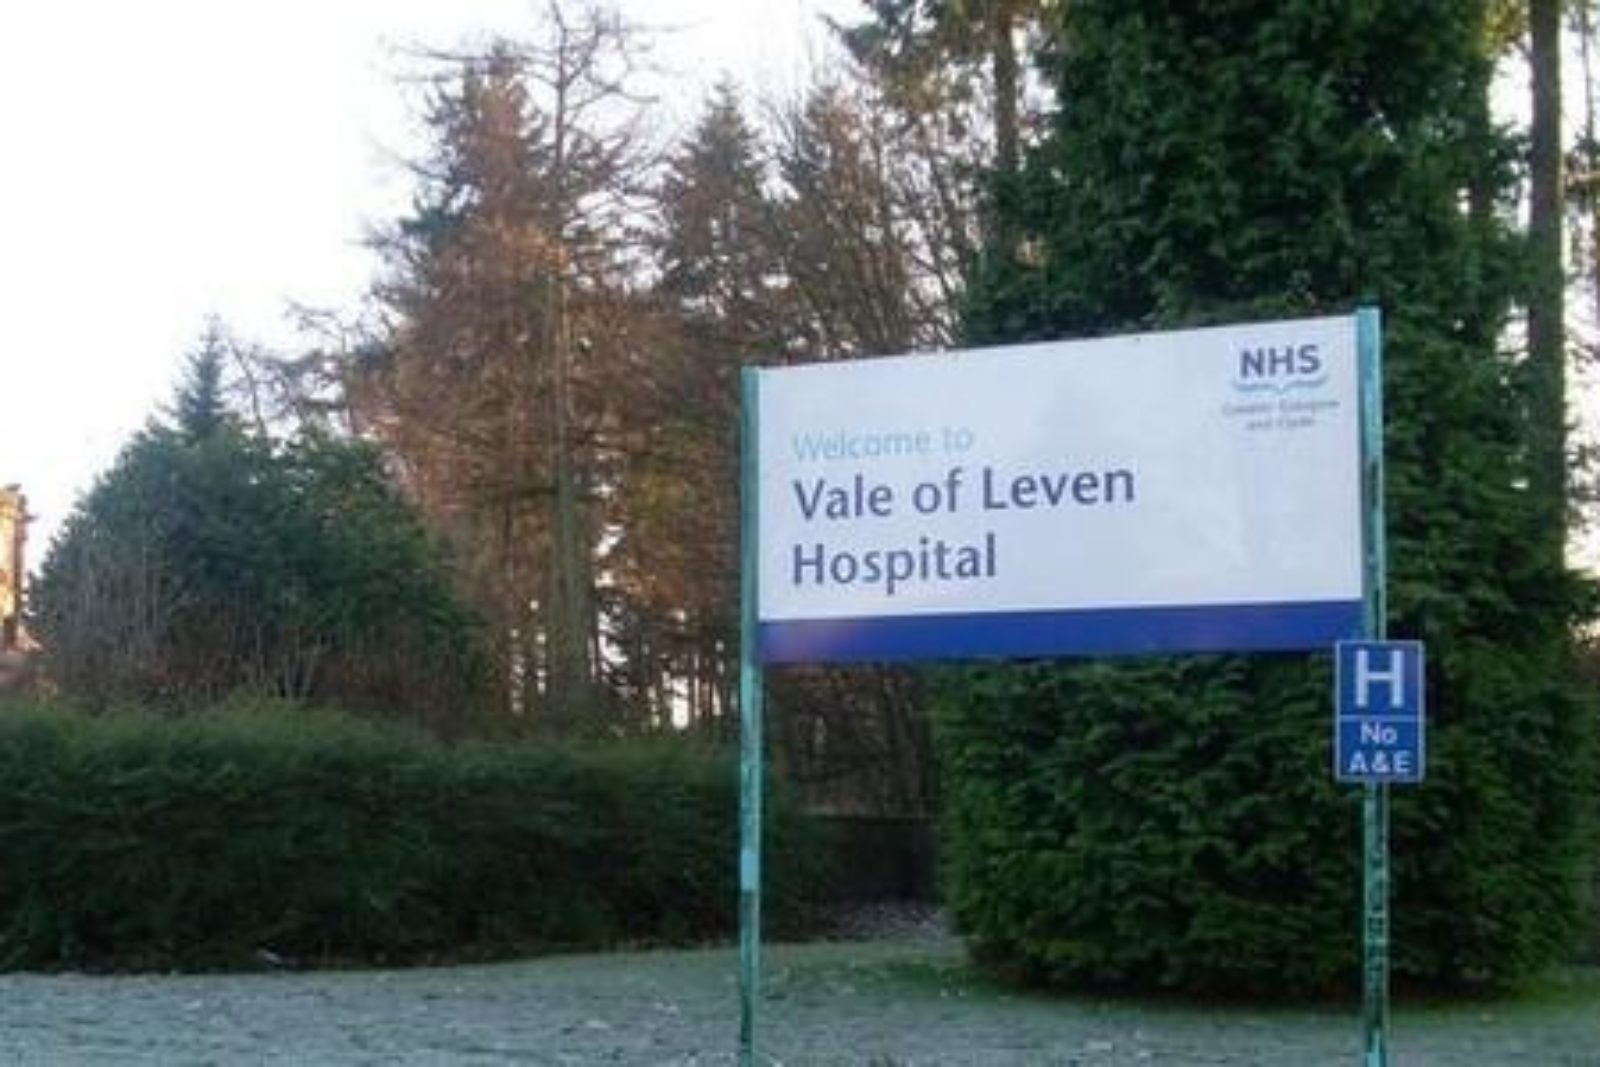 Vale of Leven hospital